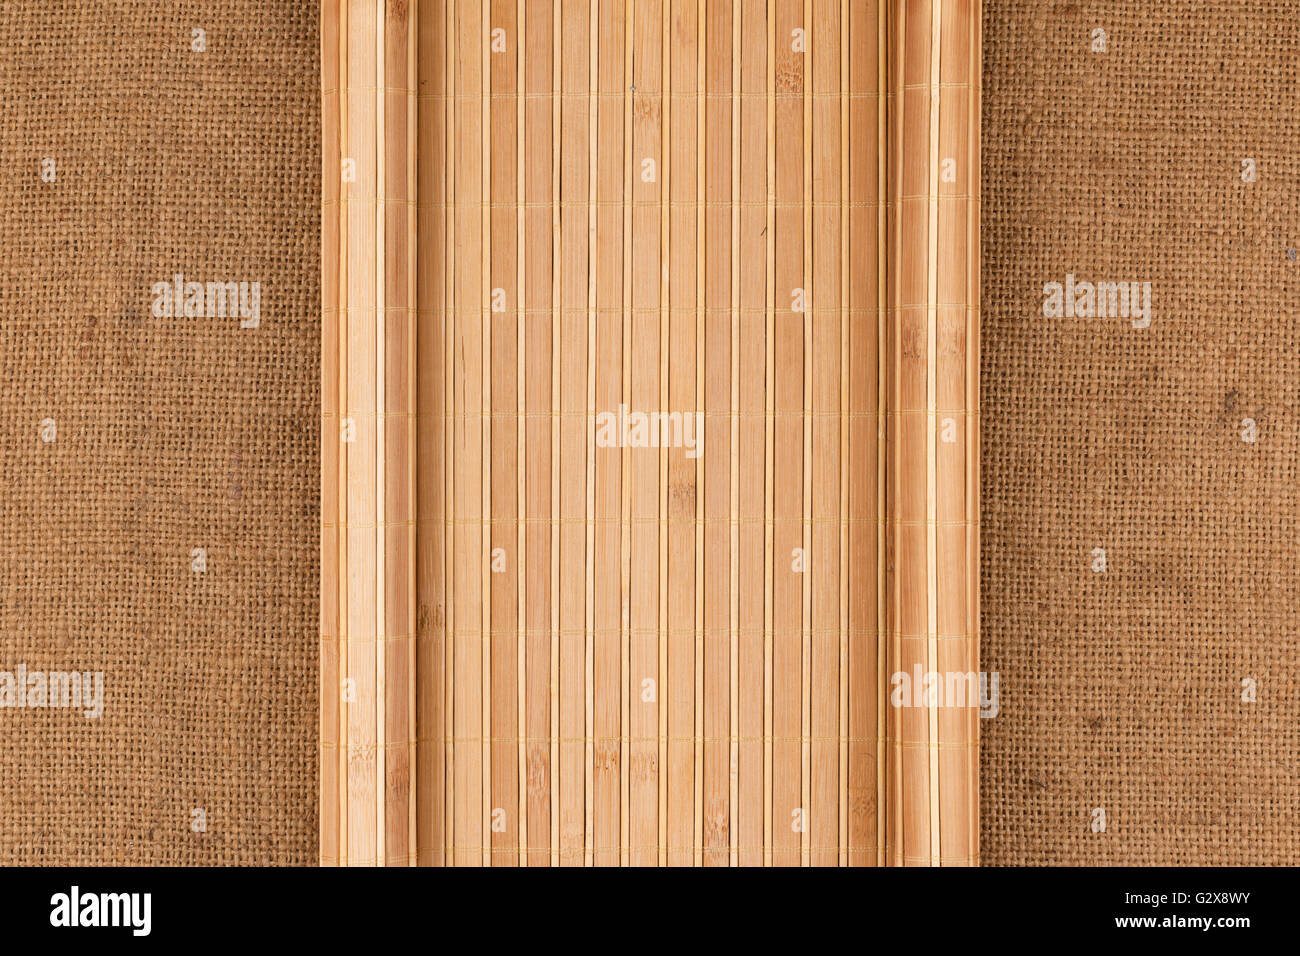 Bamboo mat in the form of a manuscript on sackcloth, top view Stock Photo